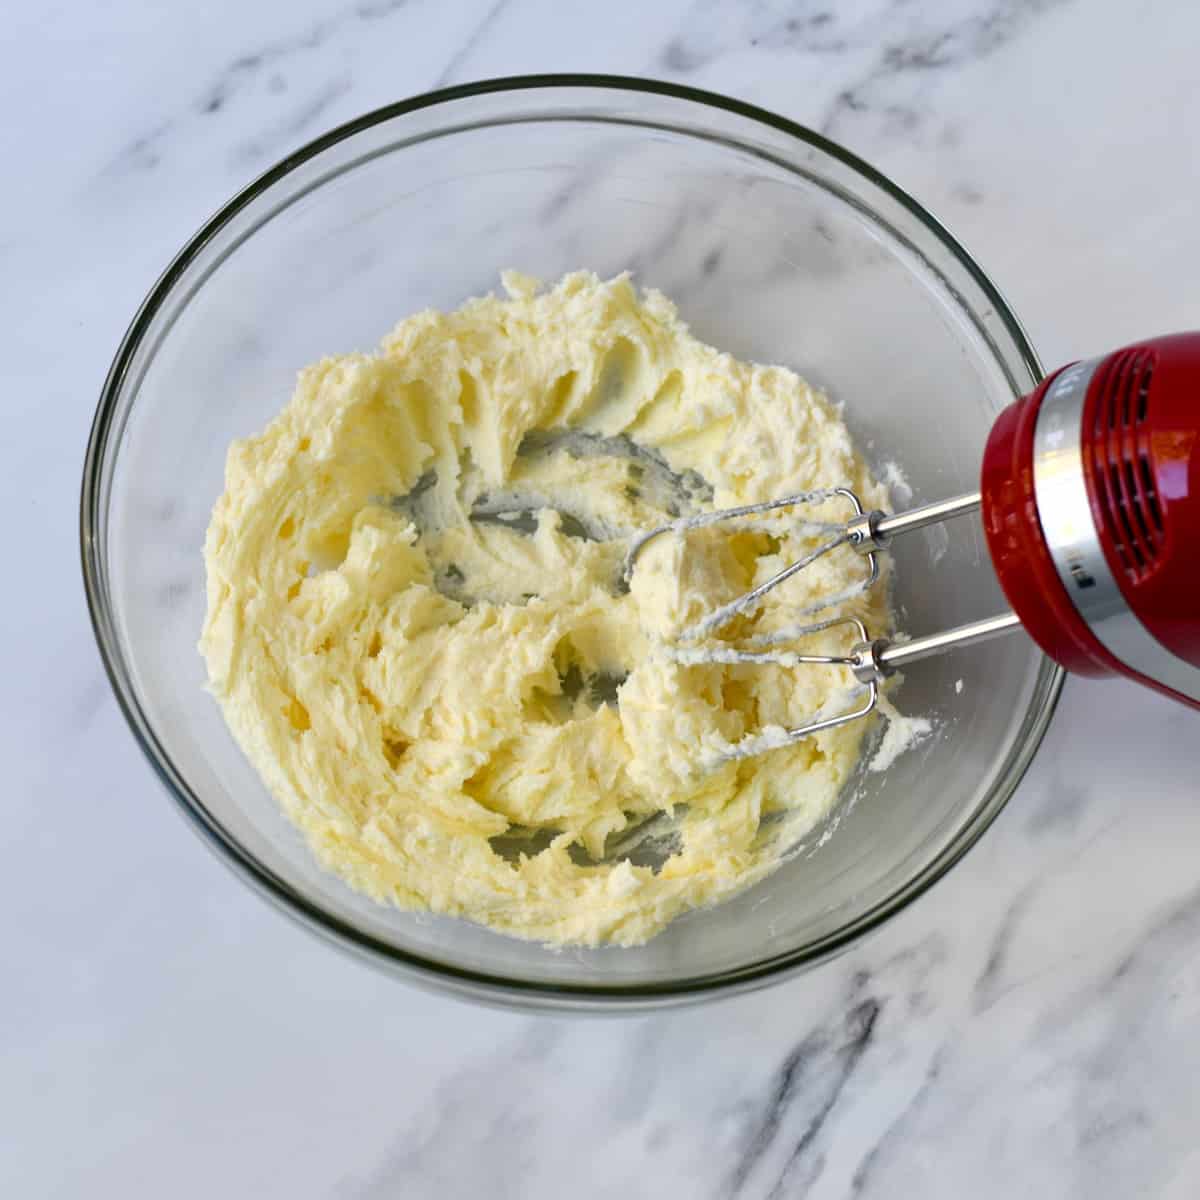 Red hand mixer beating butter and sugar in a glass bowl.